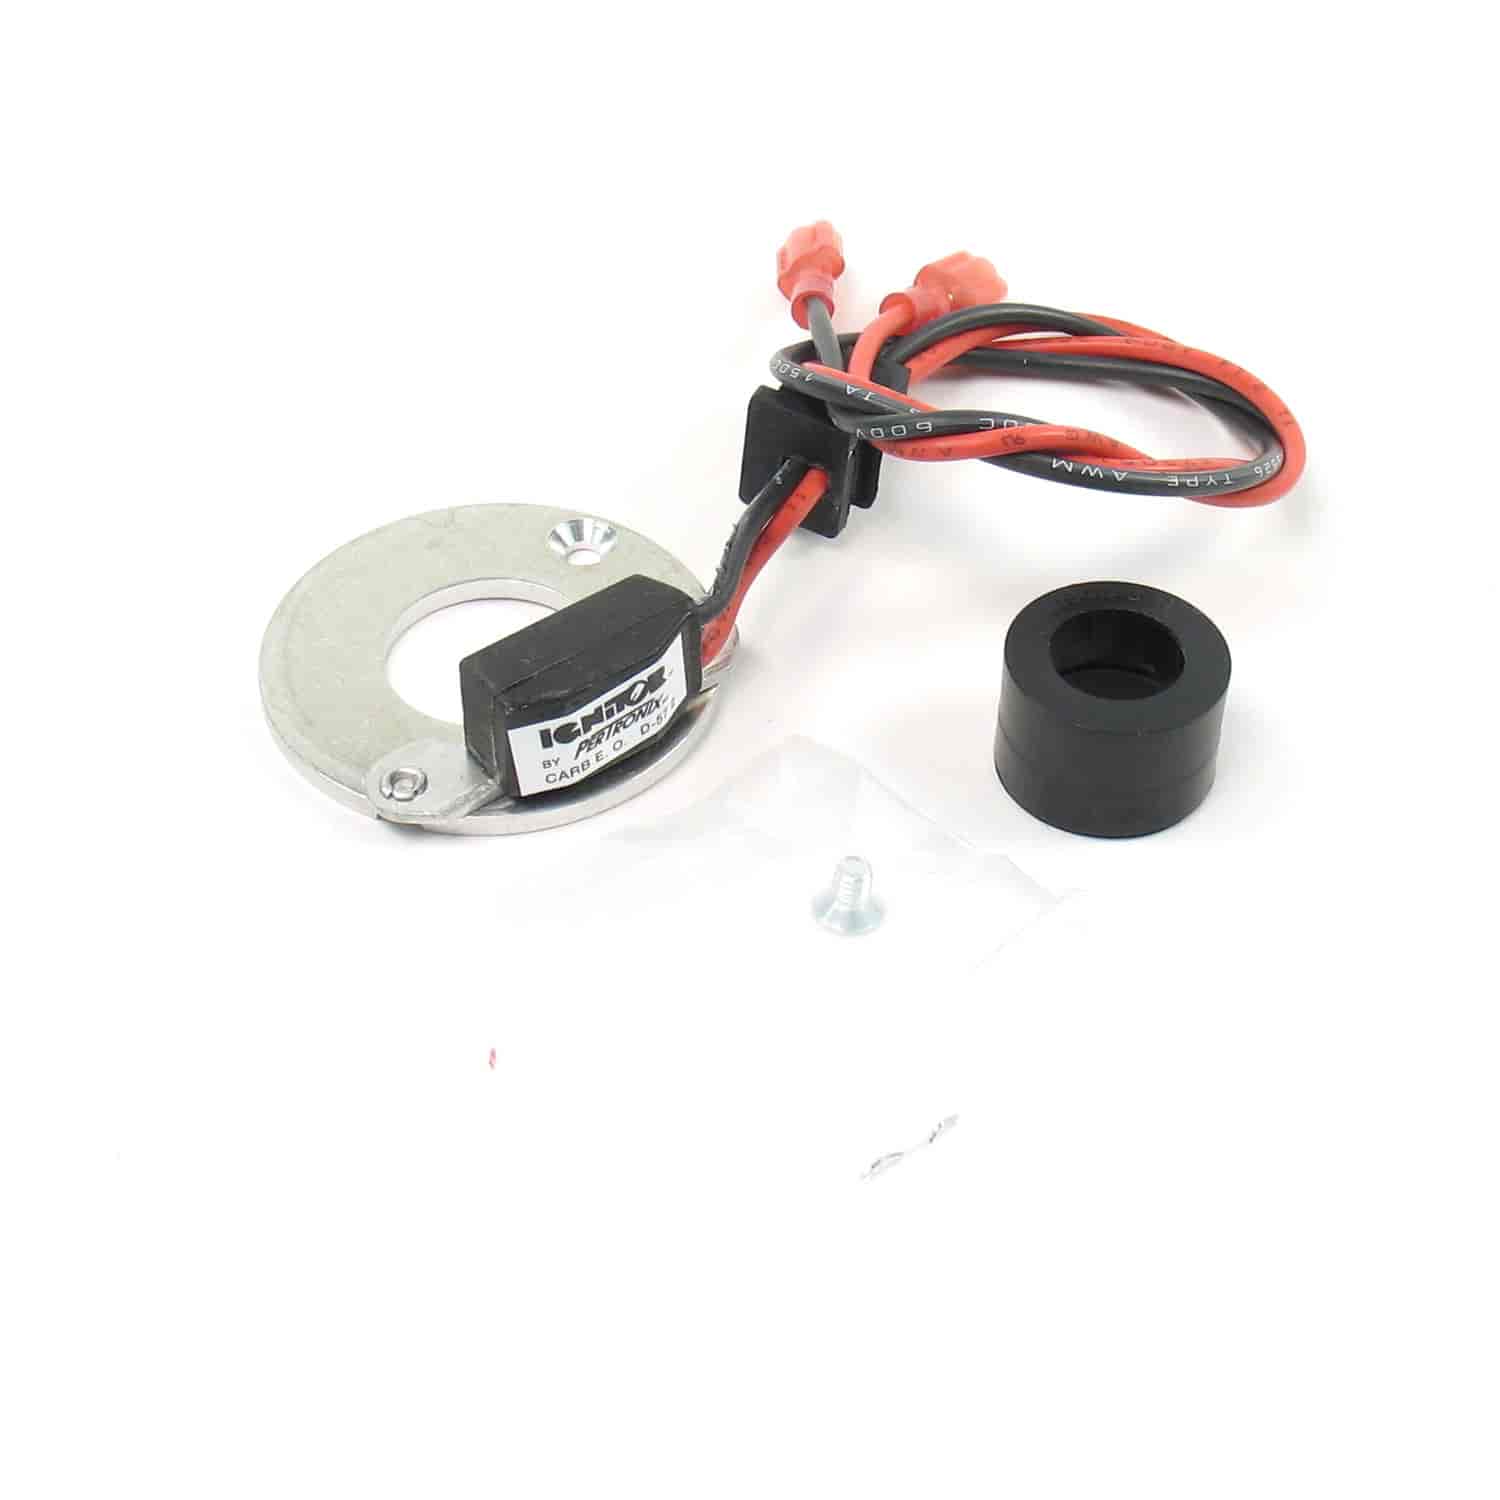 Ignition Ignitor Bosch -009 -050 Carb Approved D-57-22